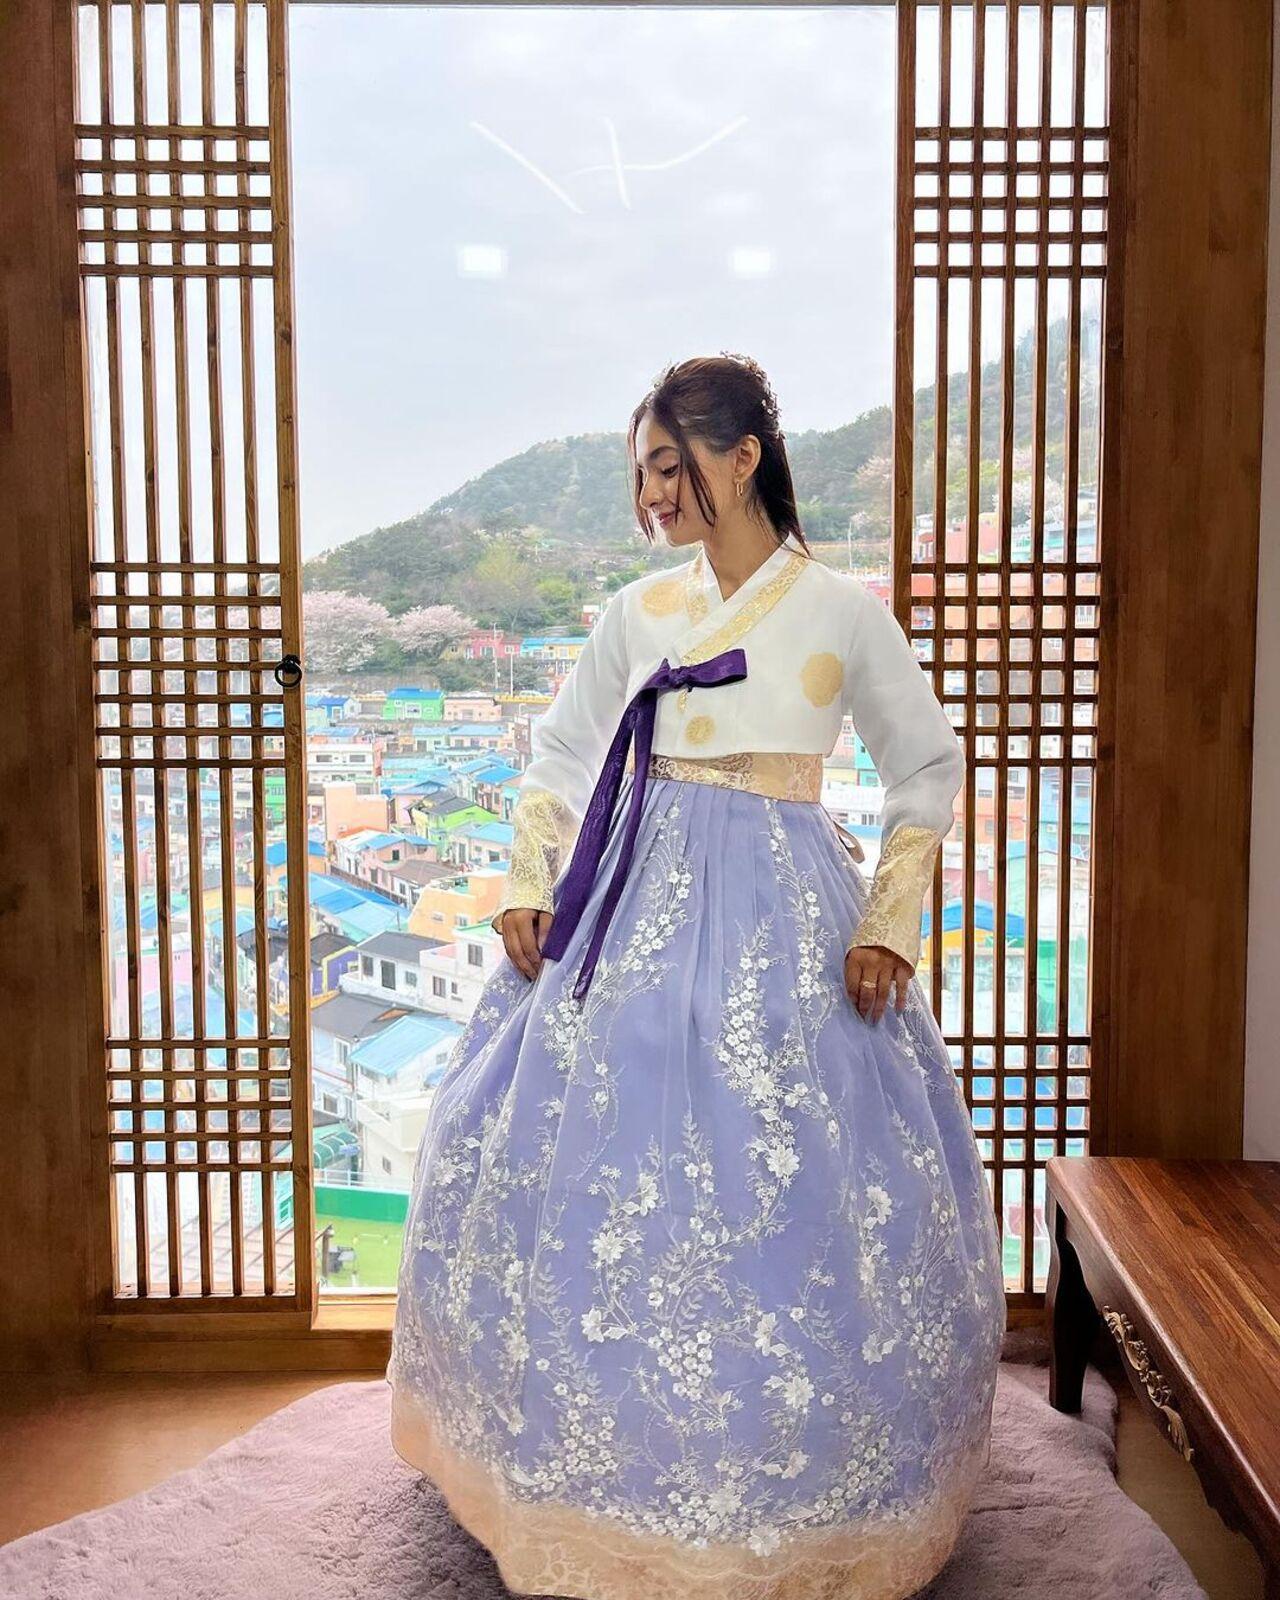 She has been sharing multiple pictures from her getaway, including this one wearing a Korean hanbok. 